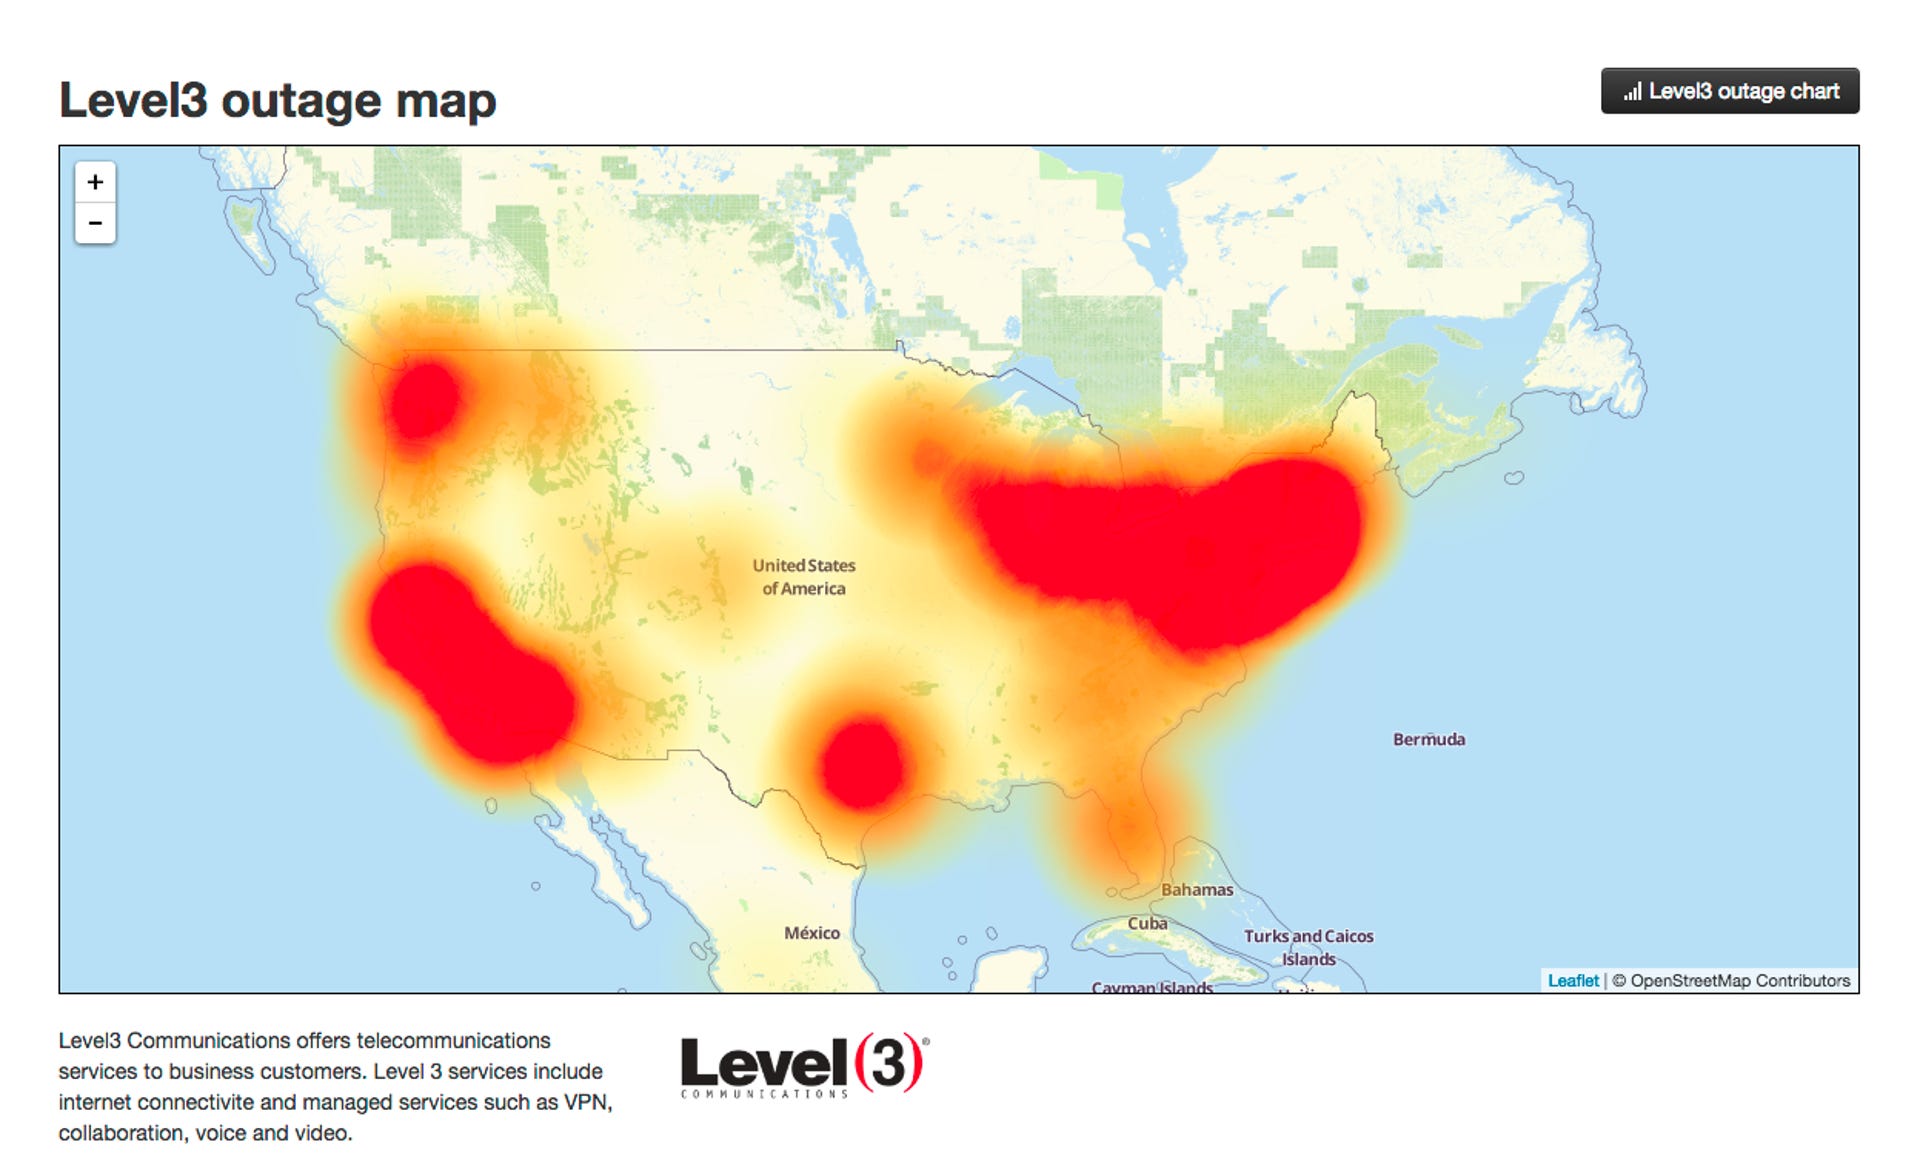 The impact of the outage as it spread to the West Coast.